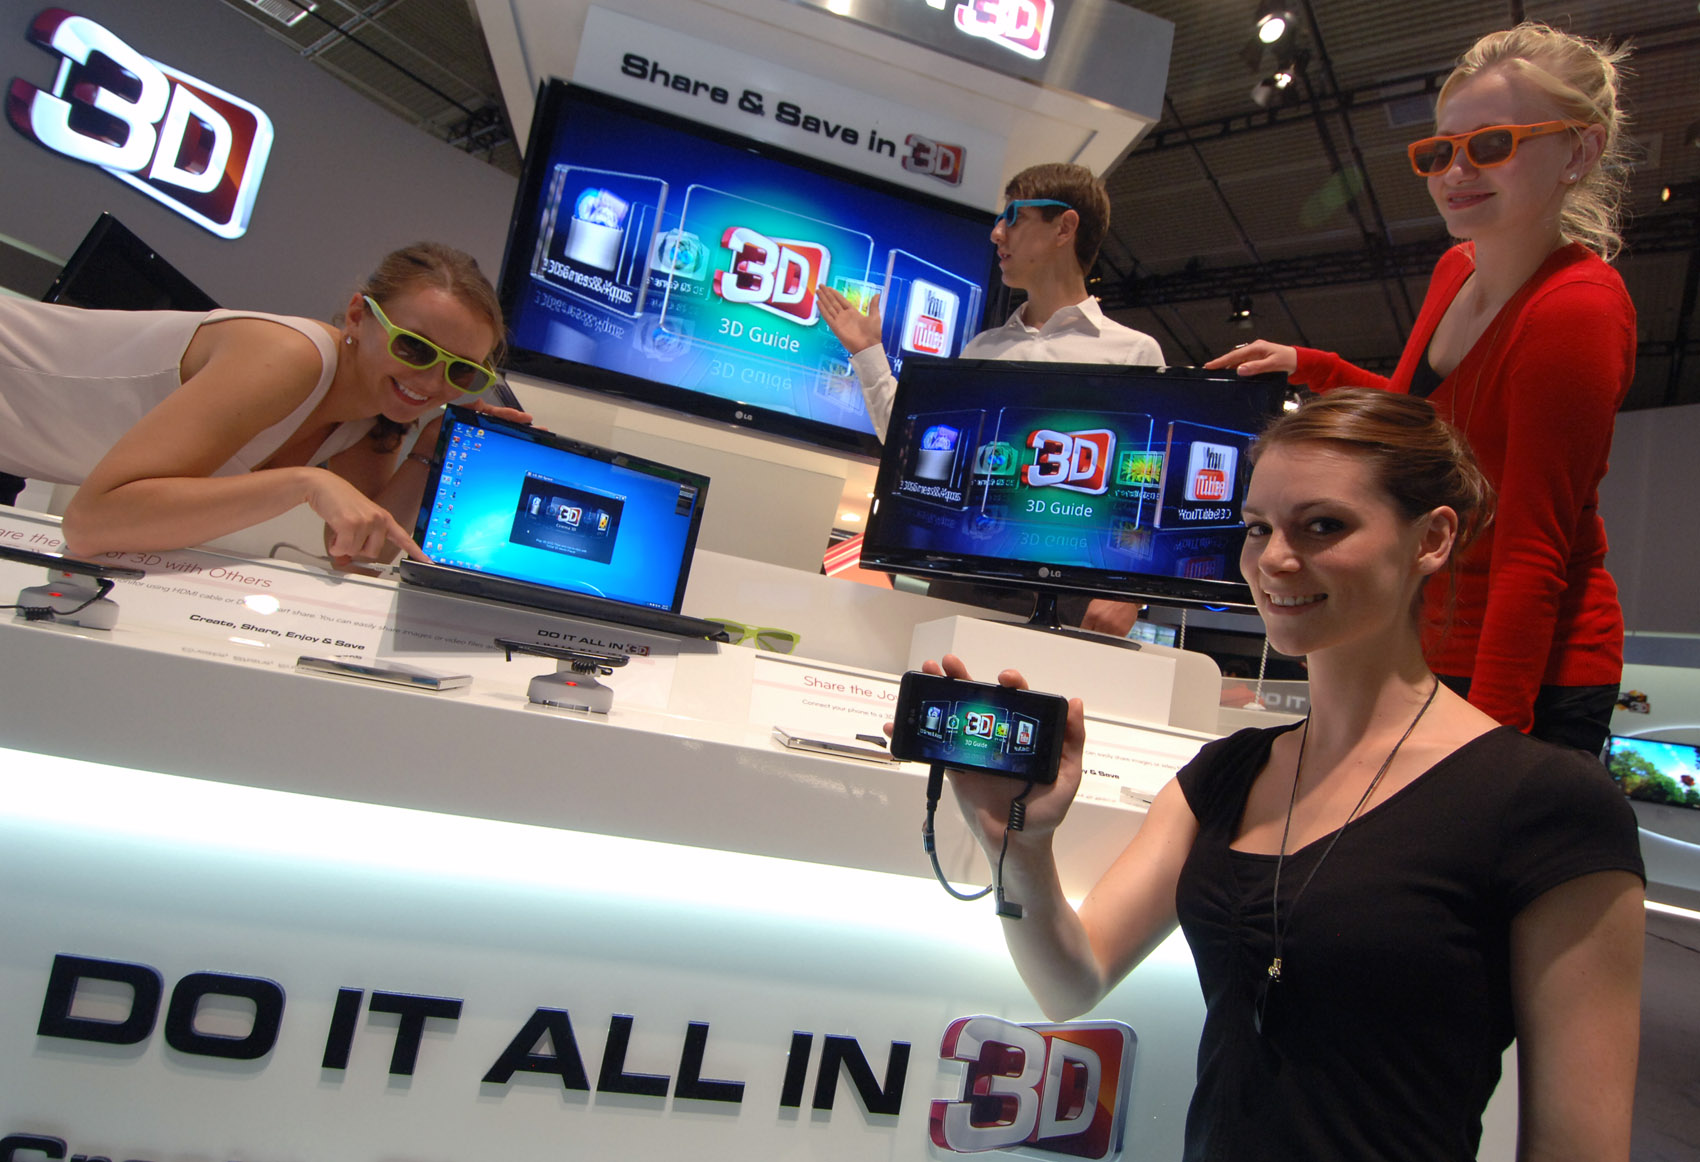 A zoom-in image of LG's diverse lineups shown at IFA 2011 including TVs, monitors, mobiles, and laptops with models